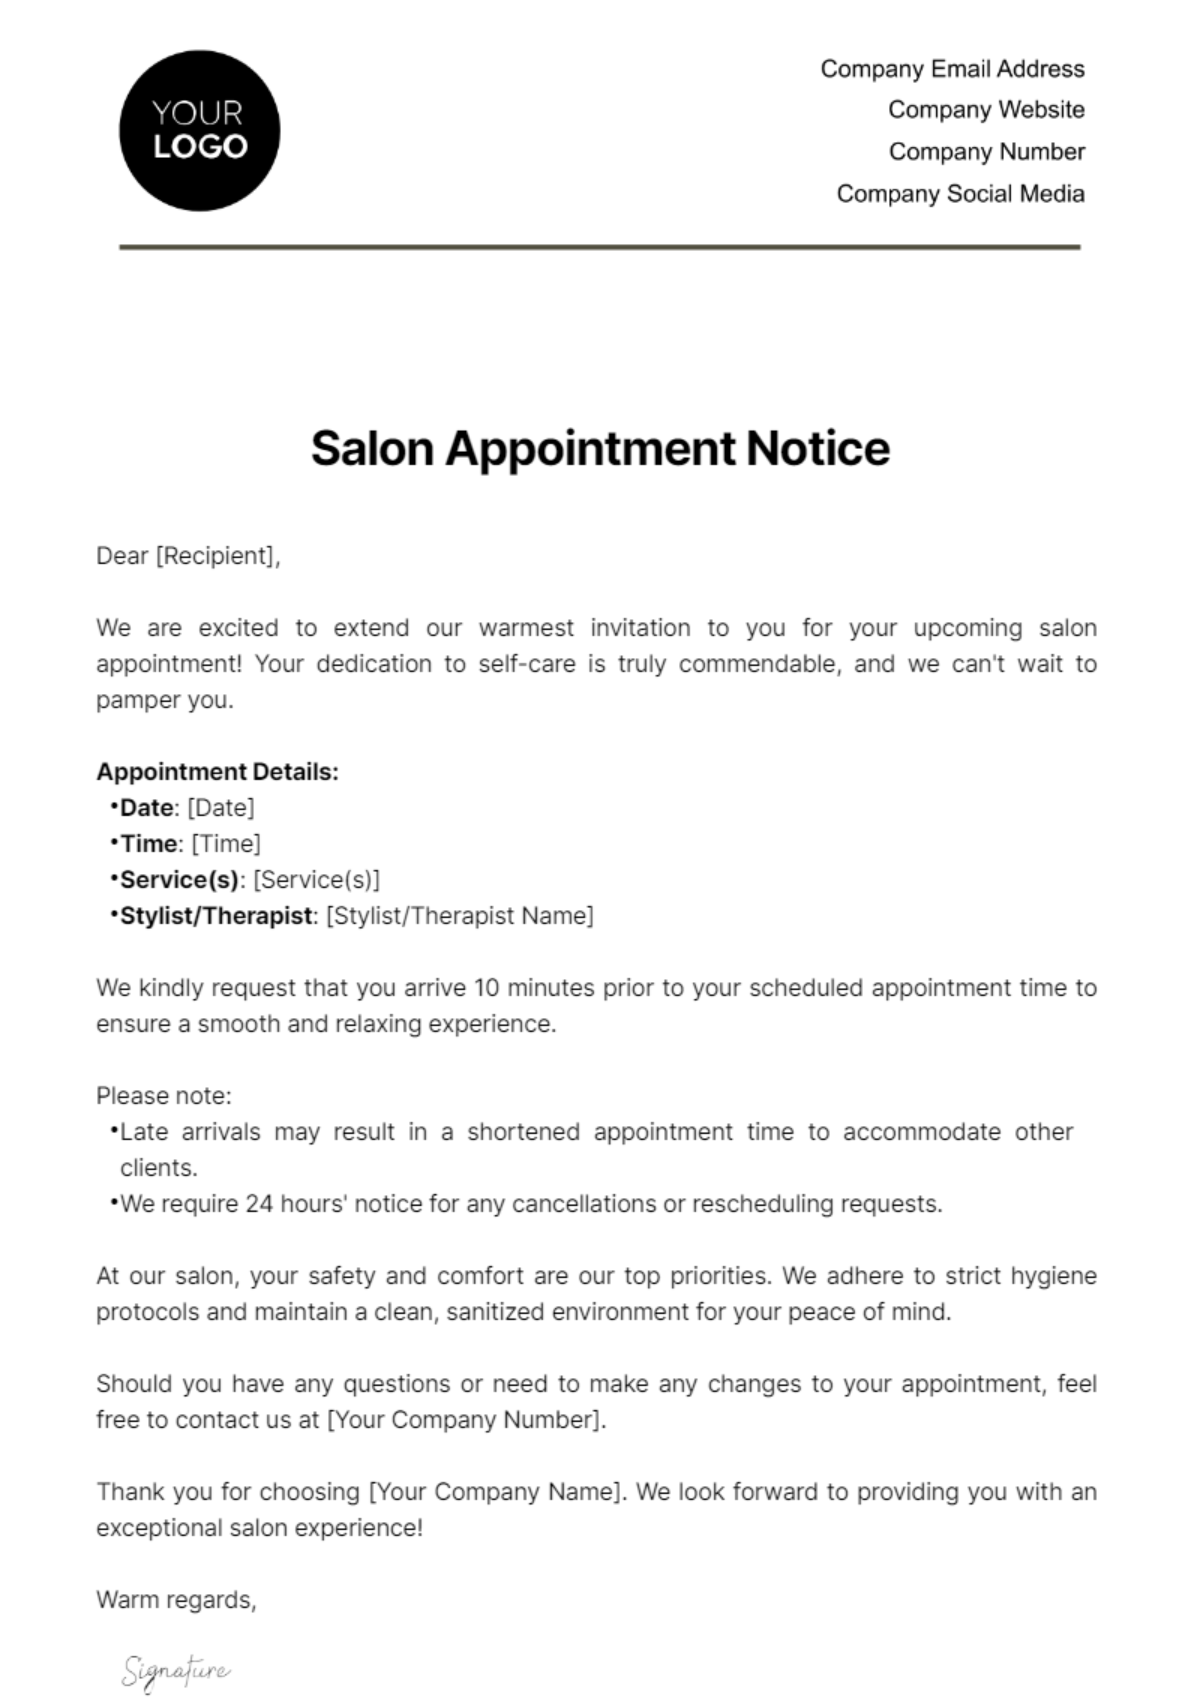 Salon Appointment Notice Template